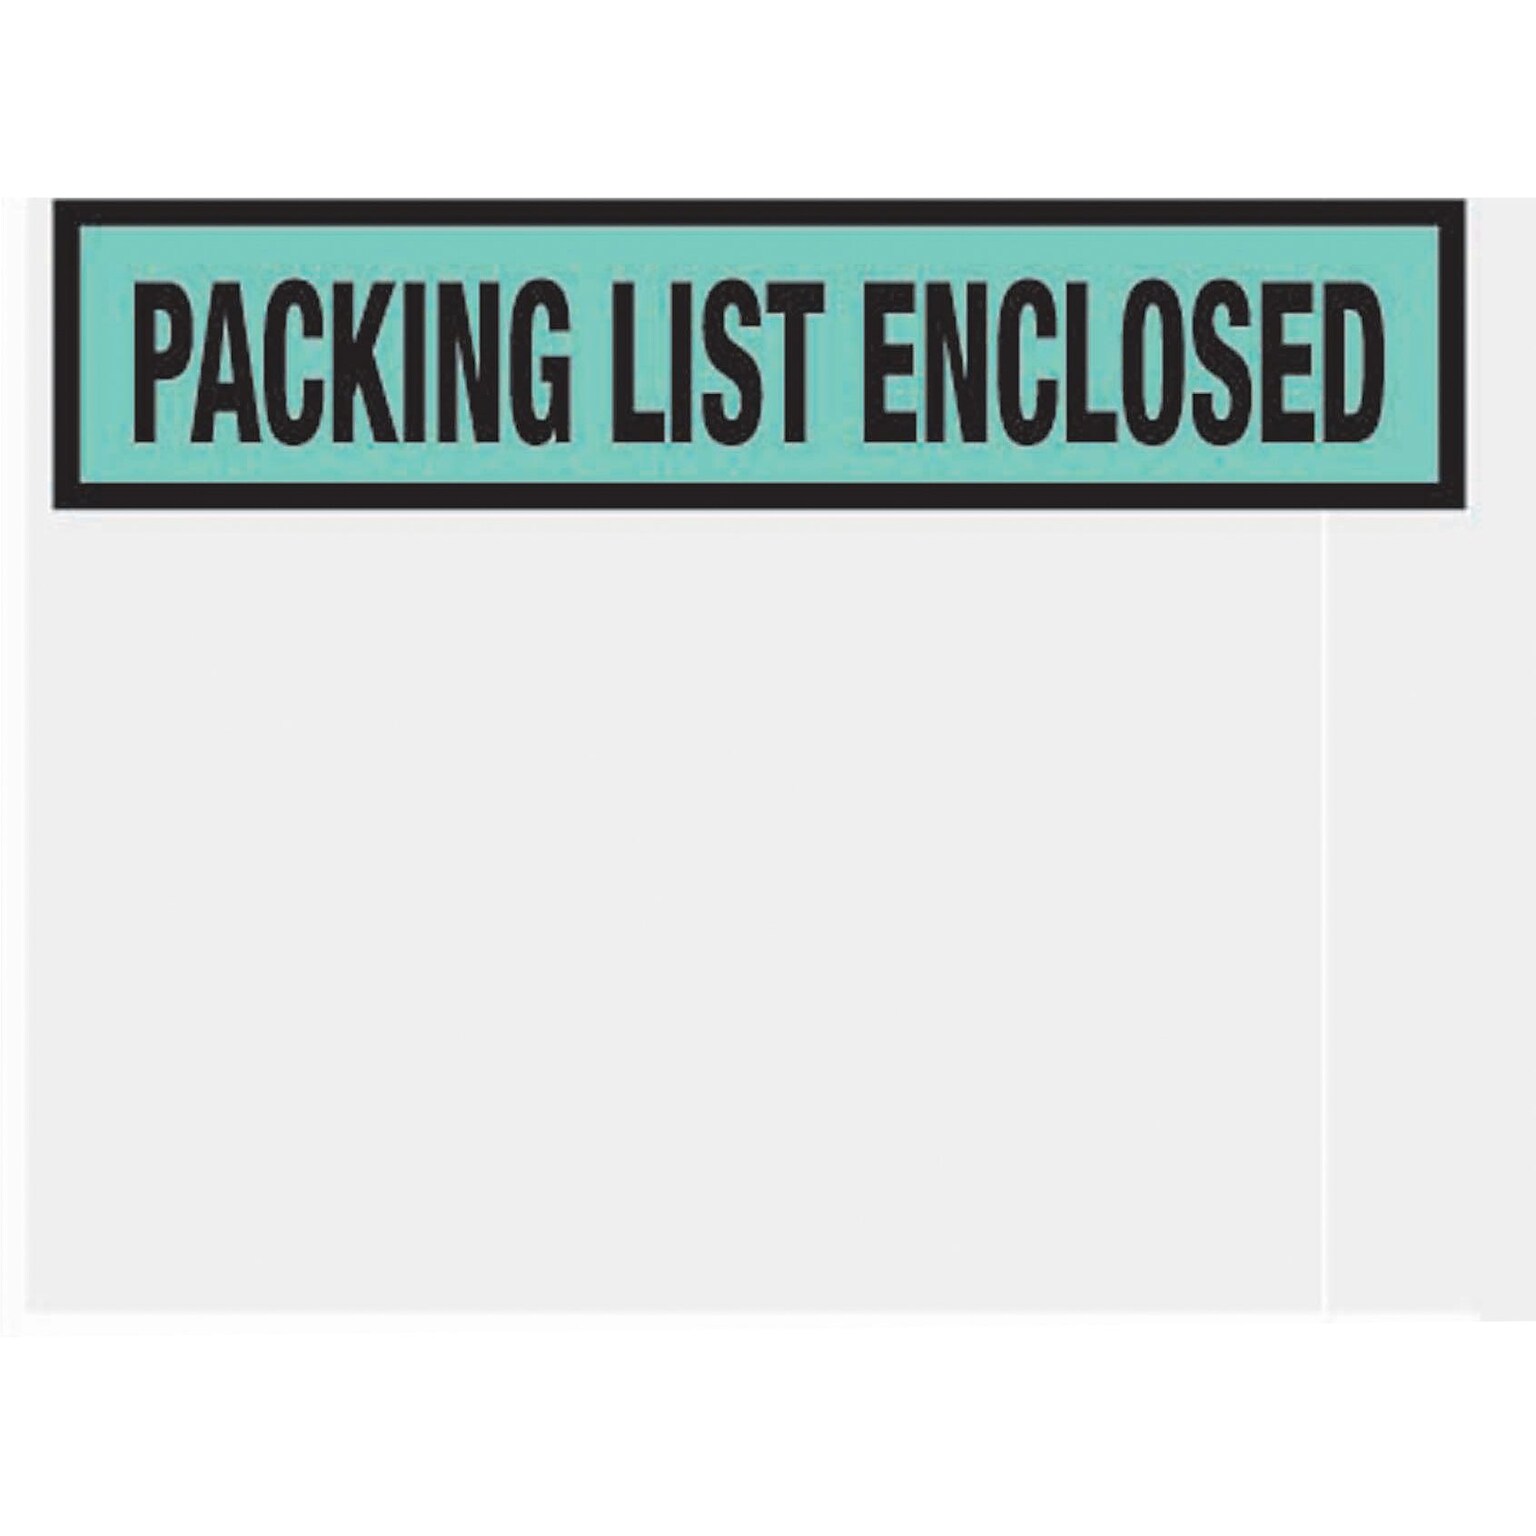 Packing List Envelopes, 4-1/2 x 5-1/2, Green Panel Face Packing List Enclosed, 1000/Case